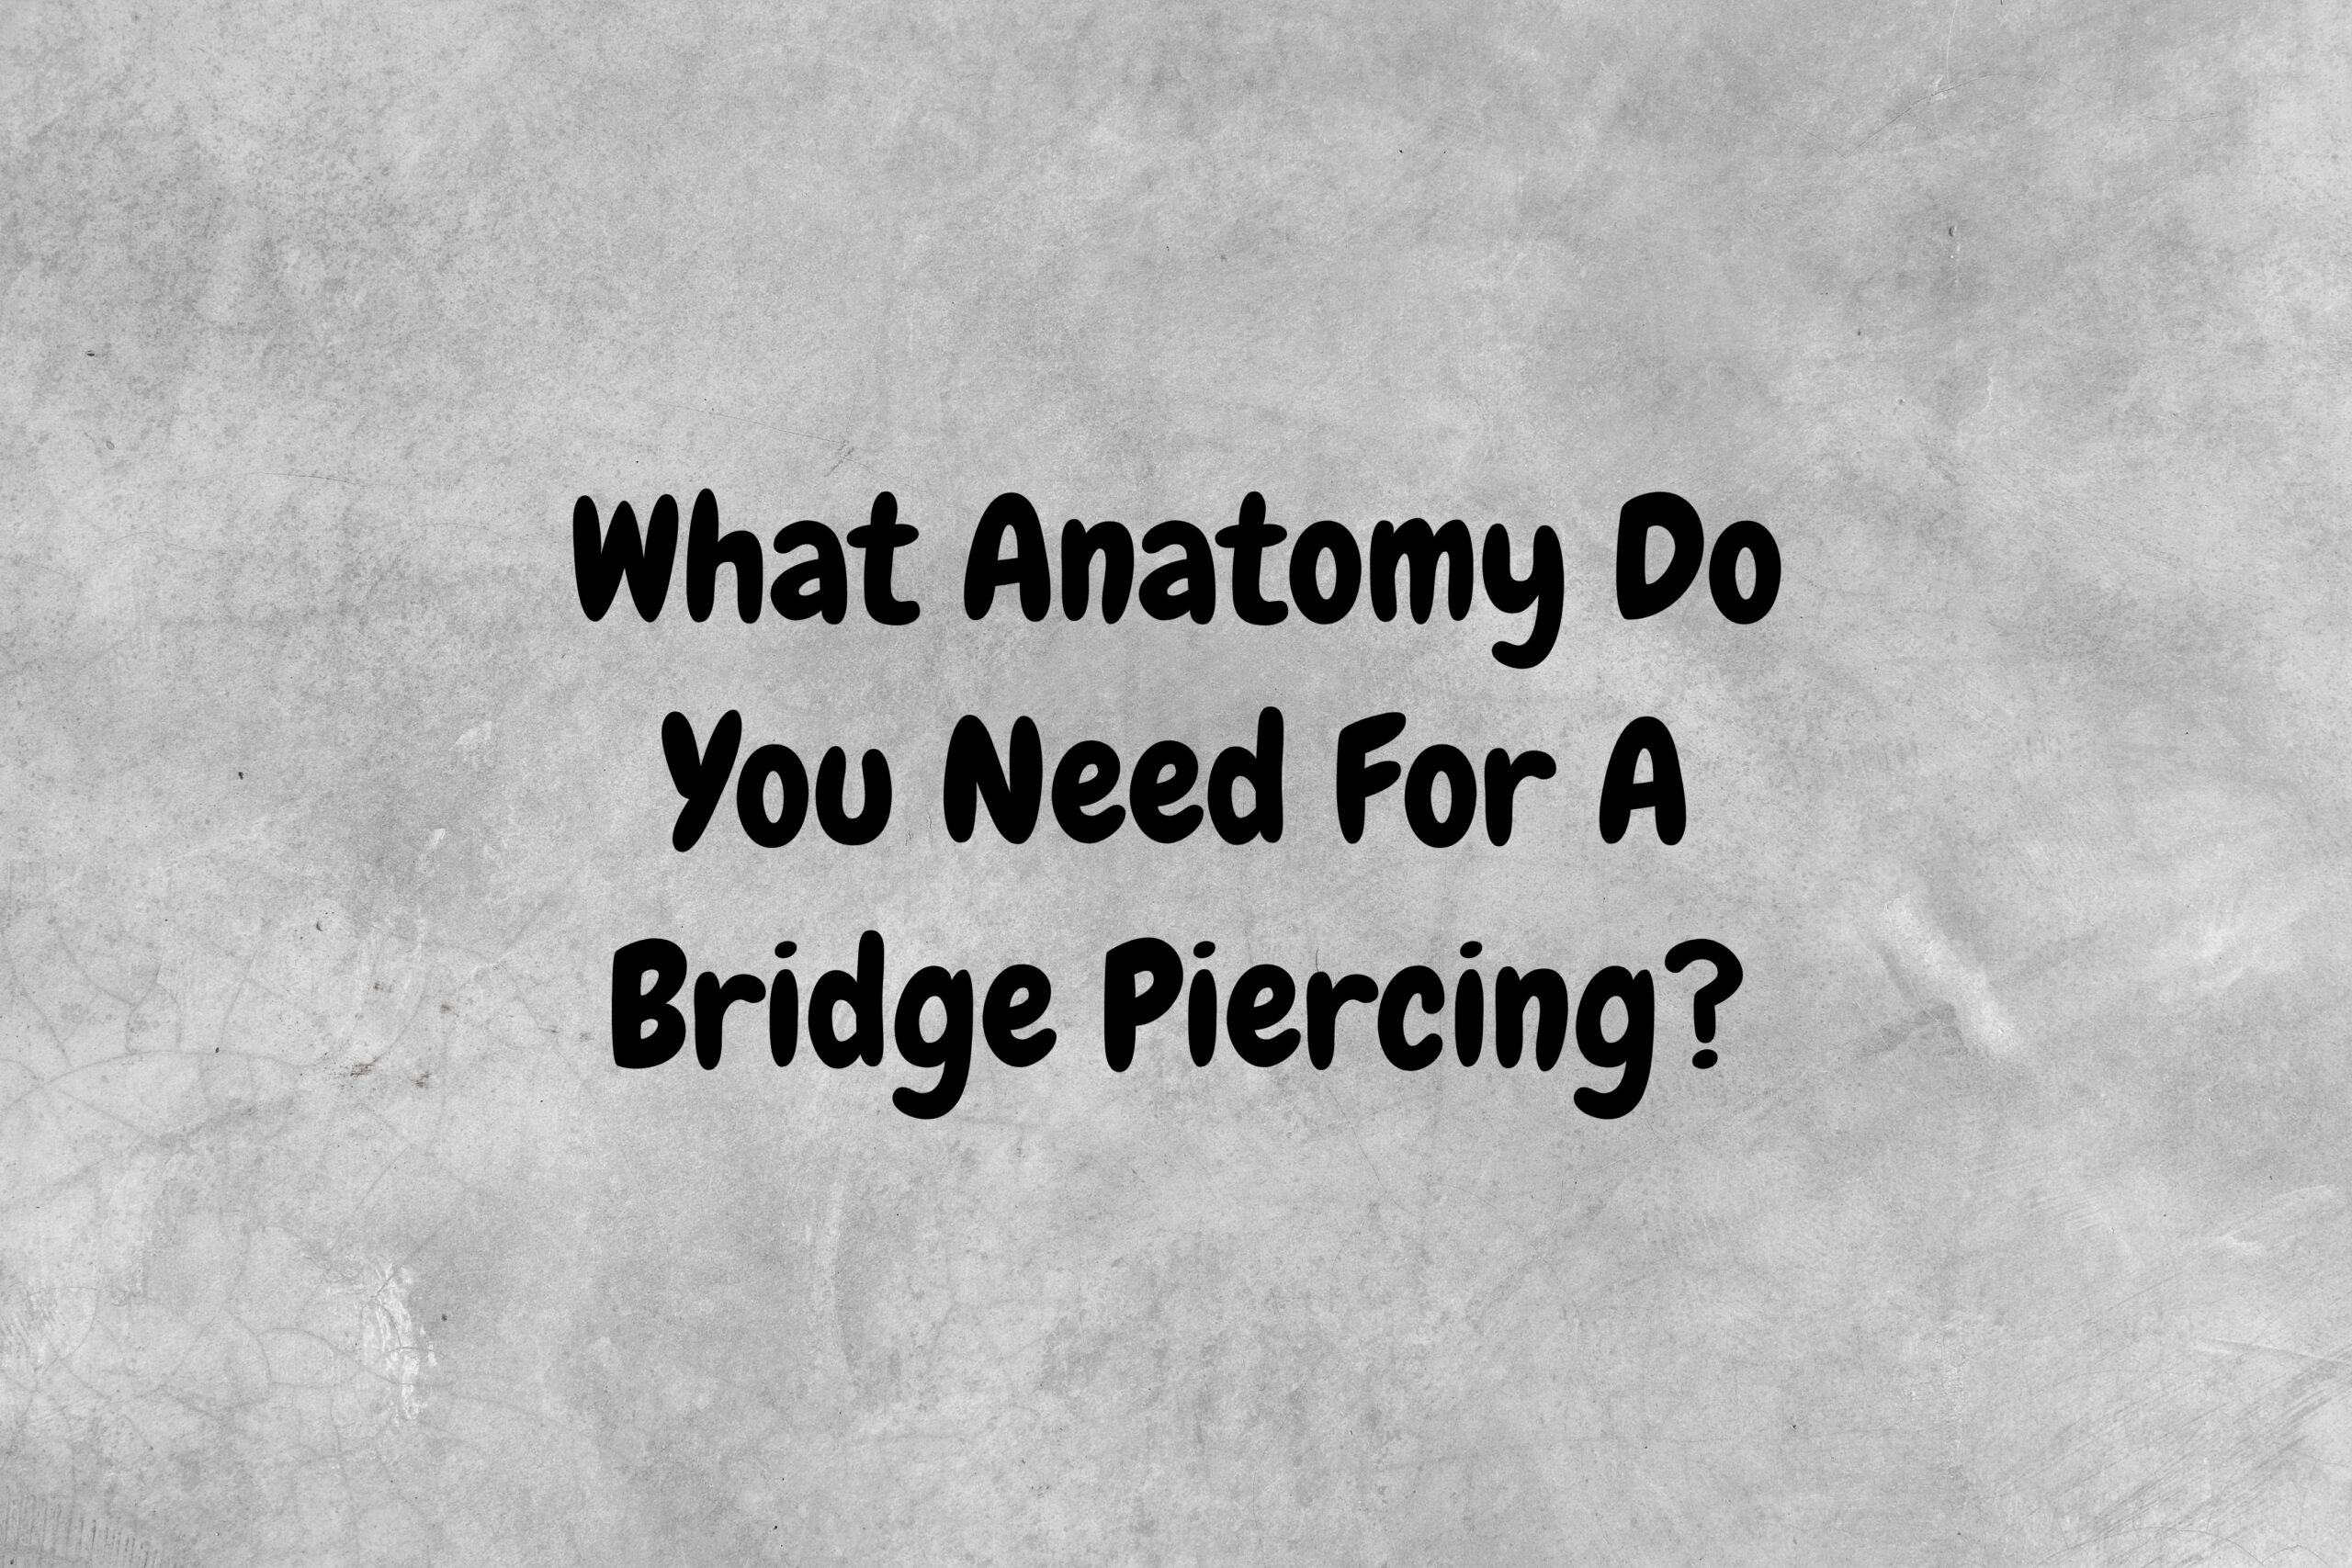 What Anatomy Do You Need For A Bridge Piercing?